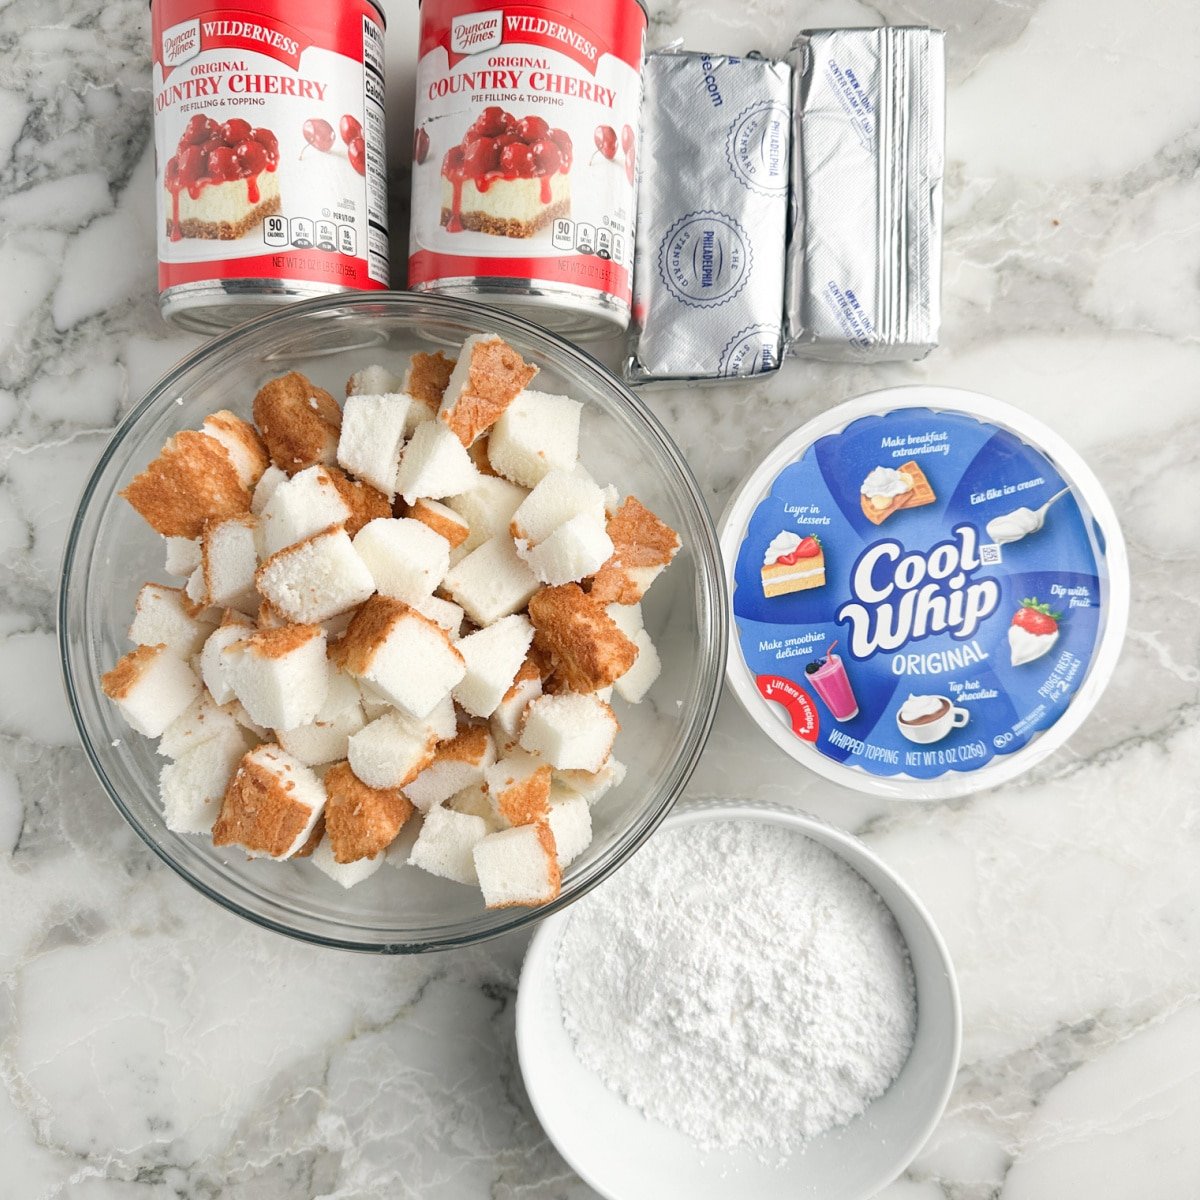 Cans of cherry pie filling, cubed angel food cake, cream cheese, powdered sugar, and cool whip.